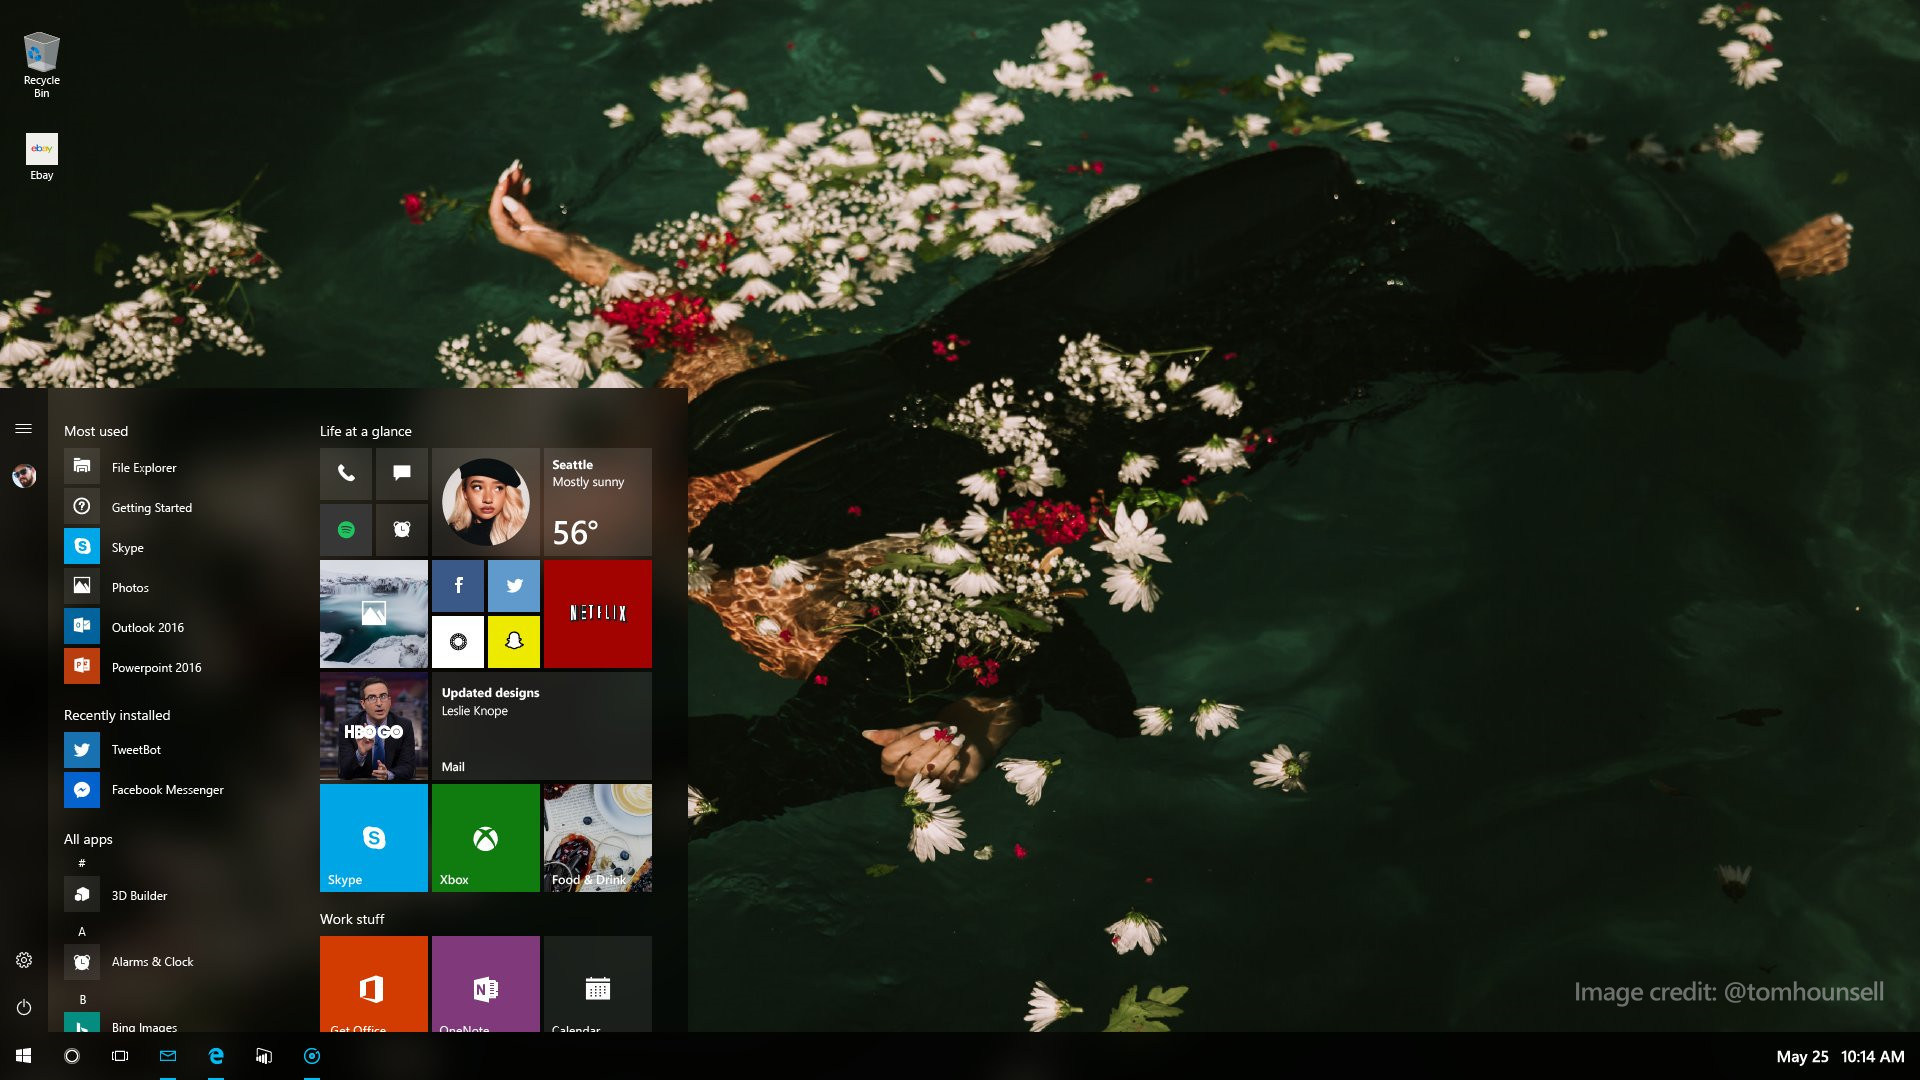 Transparent Live Tiles arent new to Windows 10 on phones, but the Start menu on PCs currently restricts all tiles to full opacity. On Windows 10 PCs,